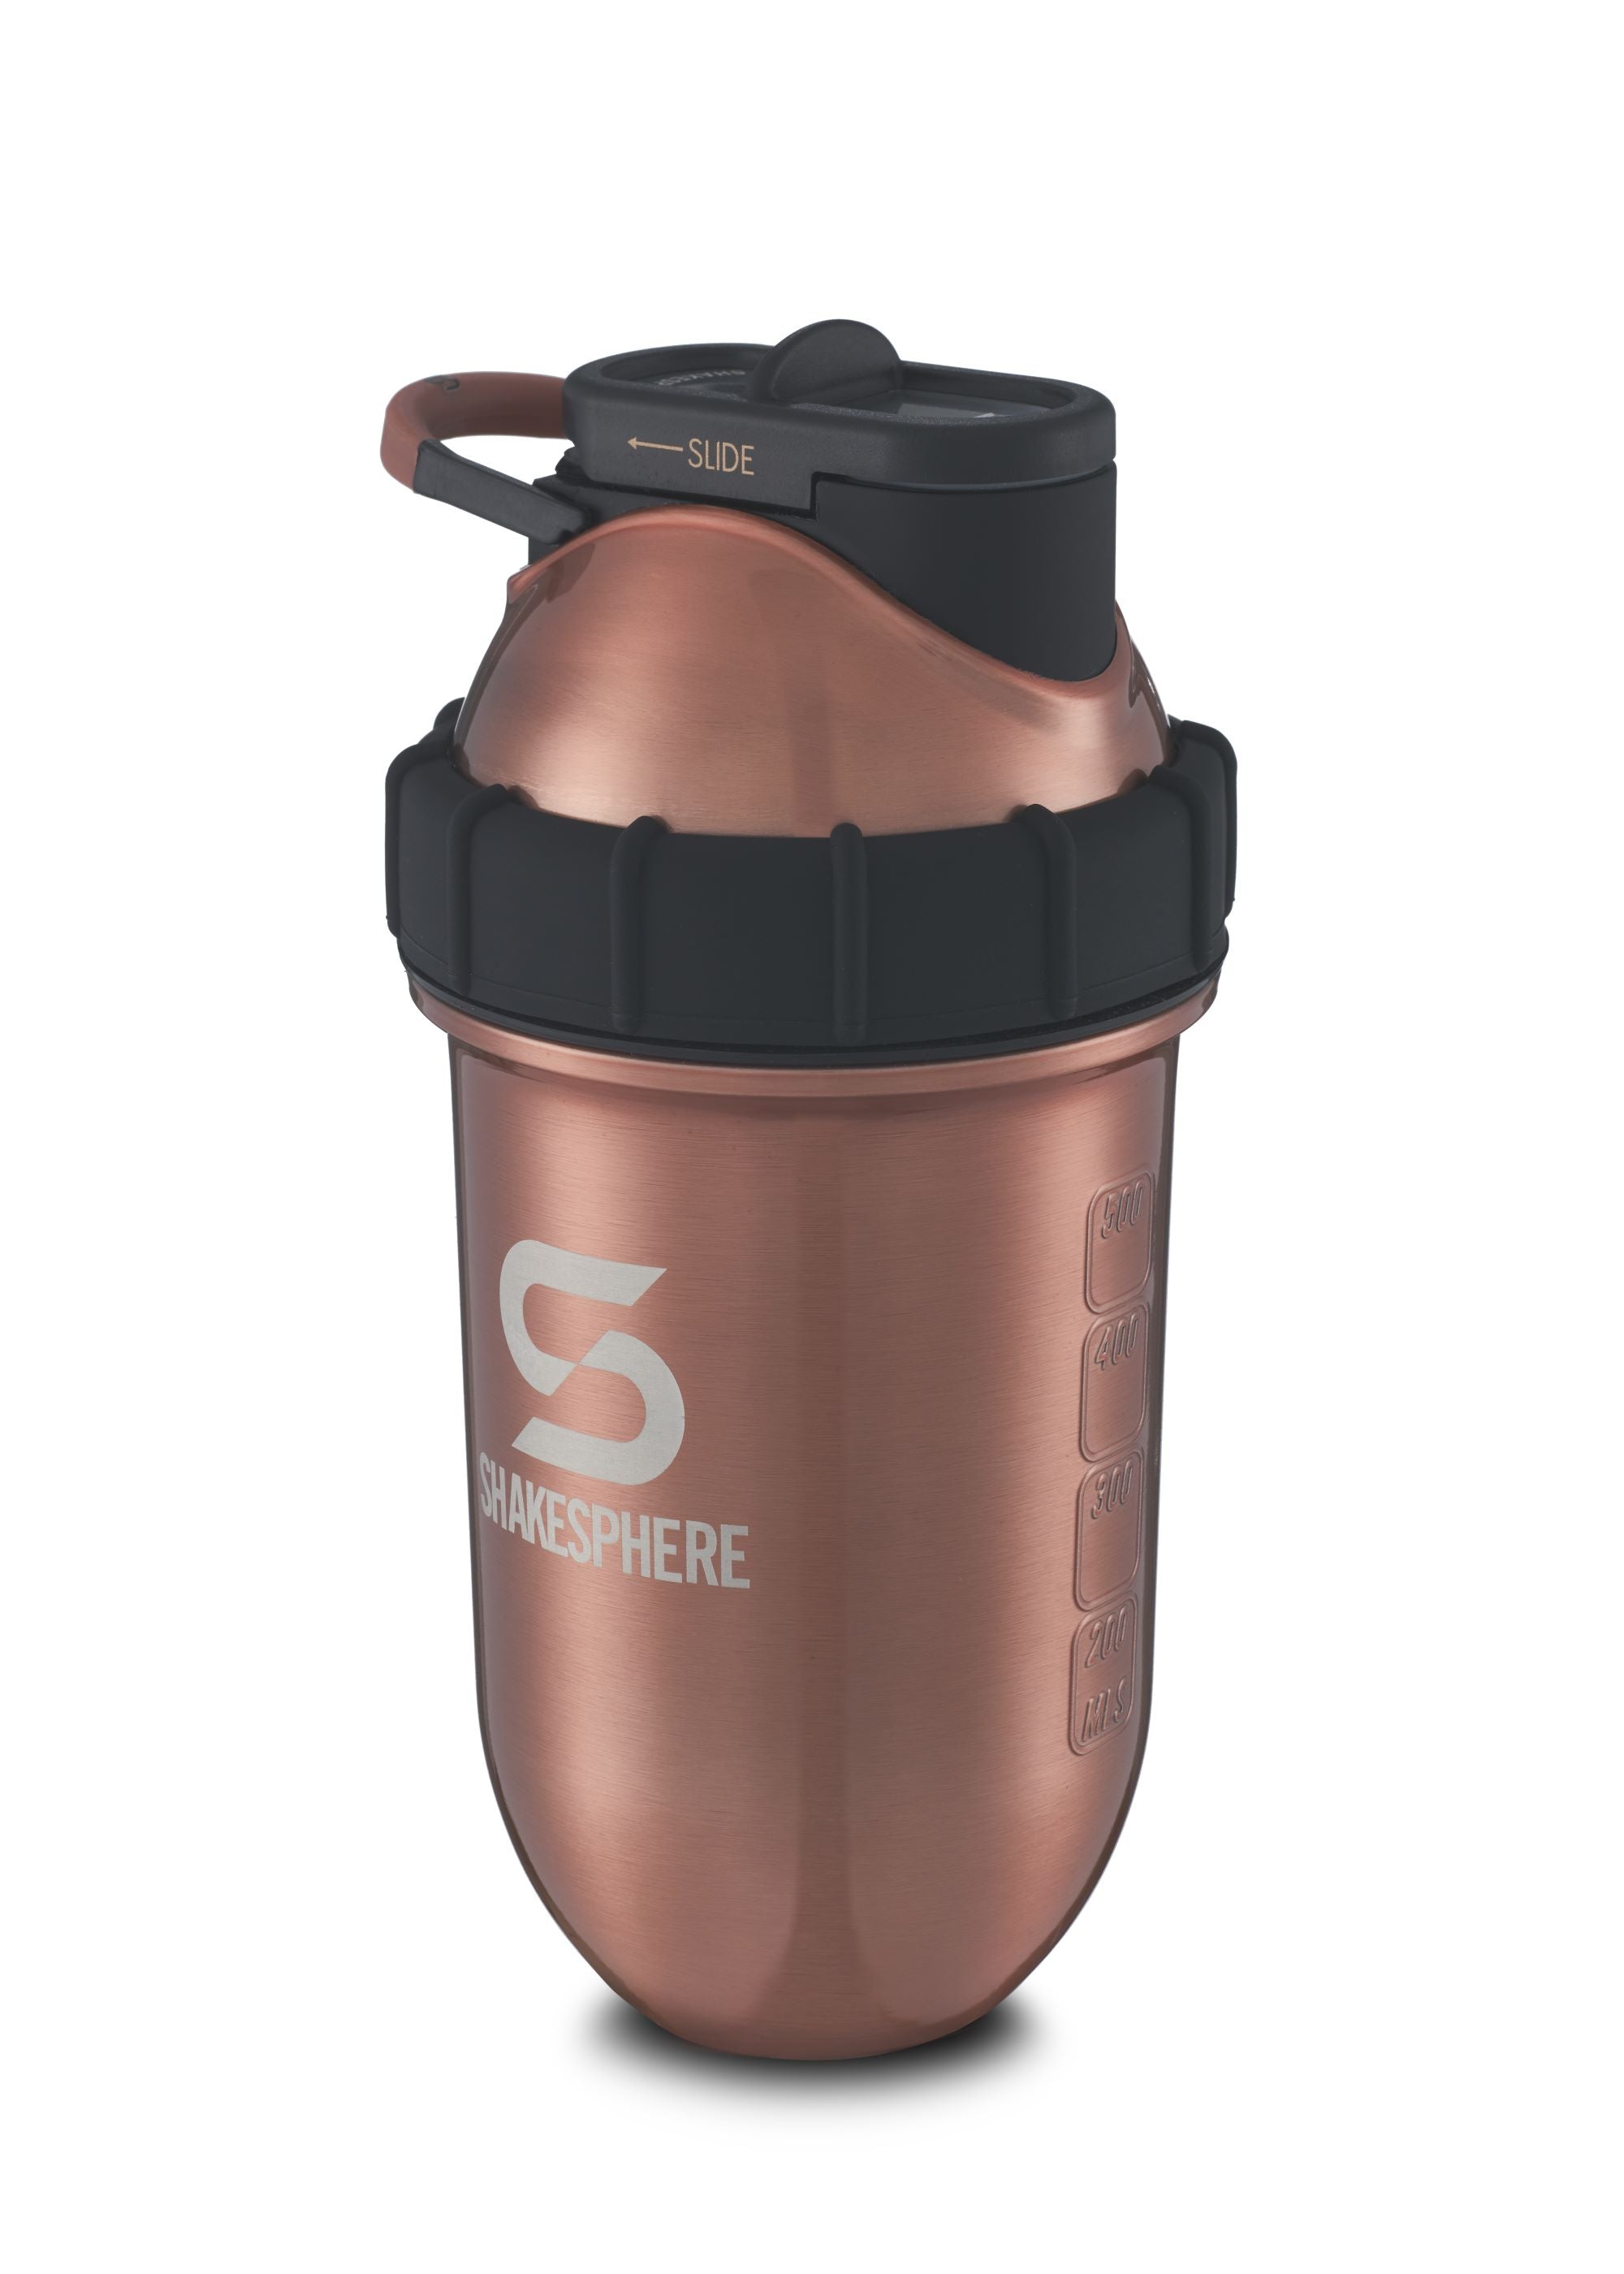 D.Y.A 12 Ounce Round Polypropylene Stainless Steel Protein Shaker Bottle